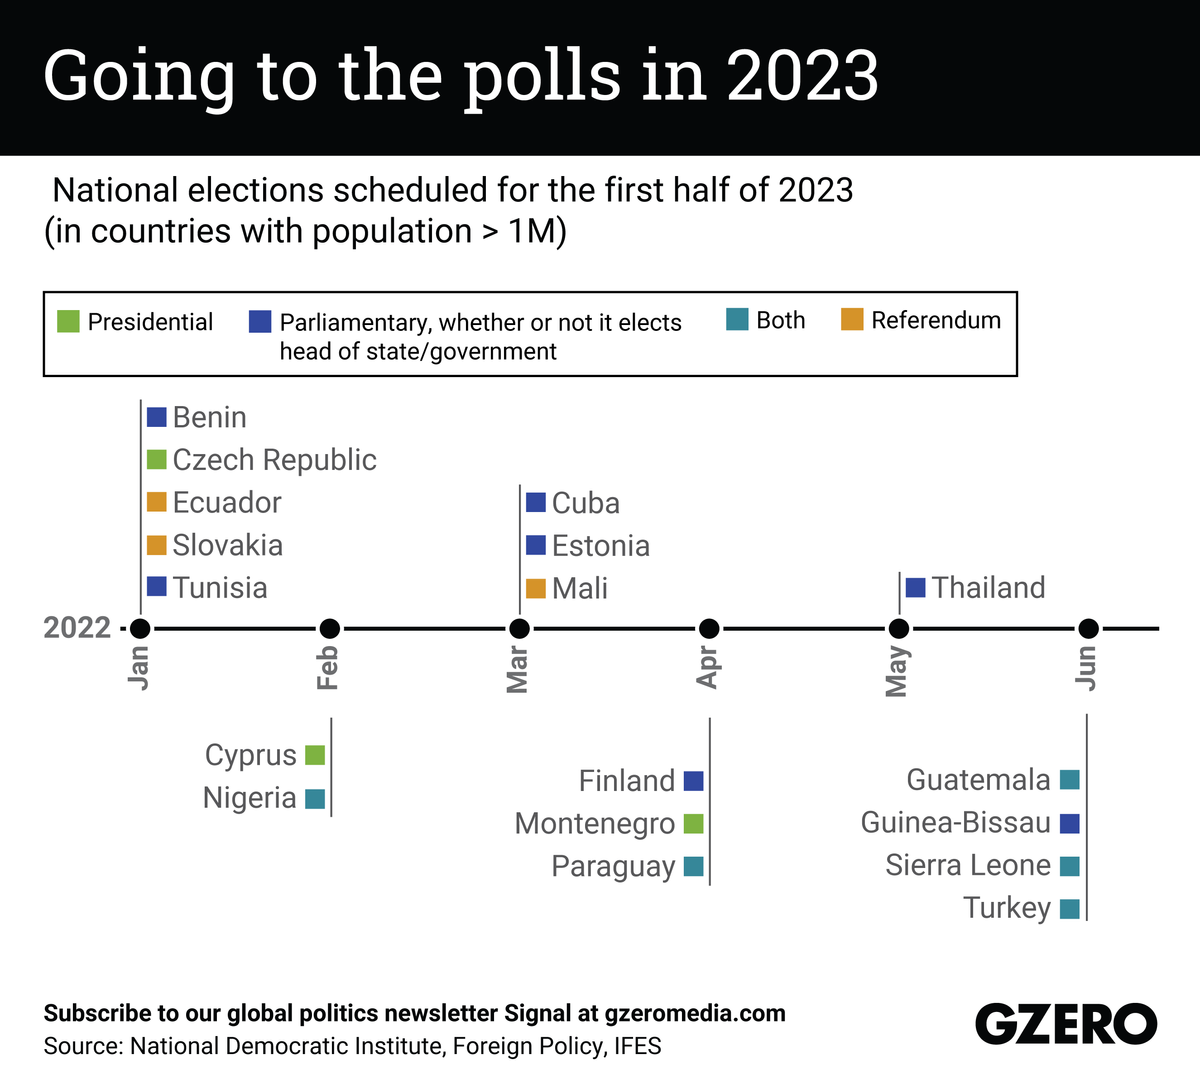 Timeline of national elections in first half of 2023